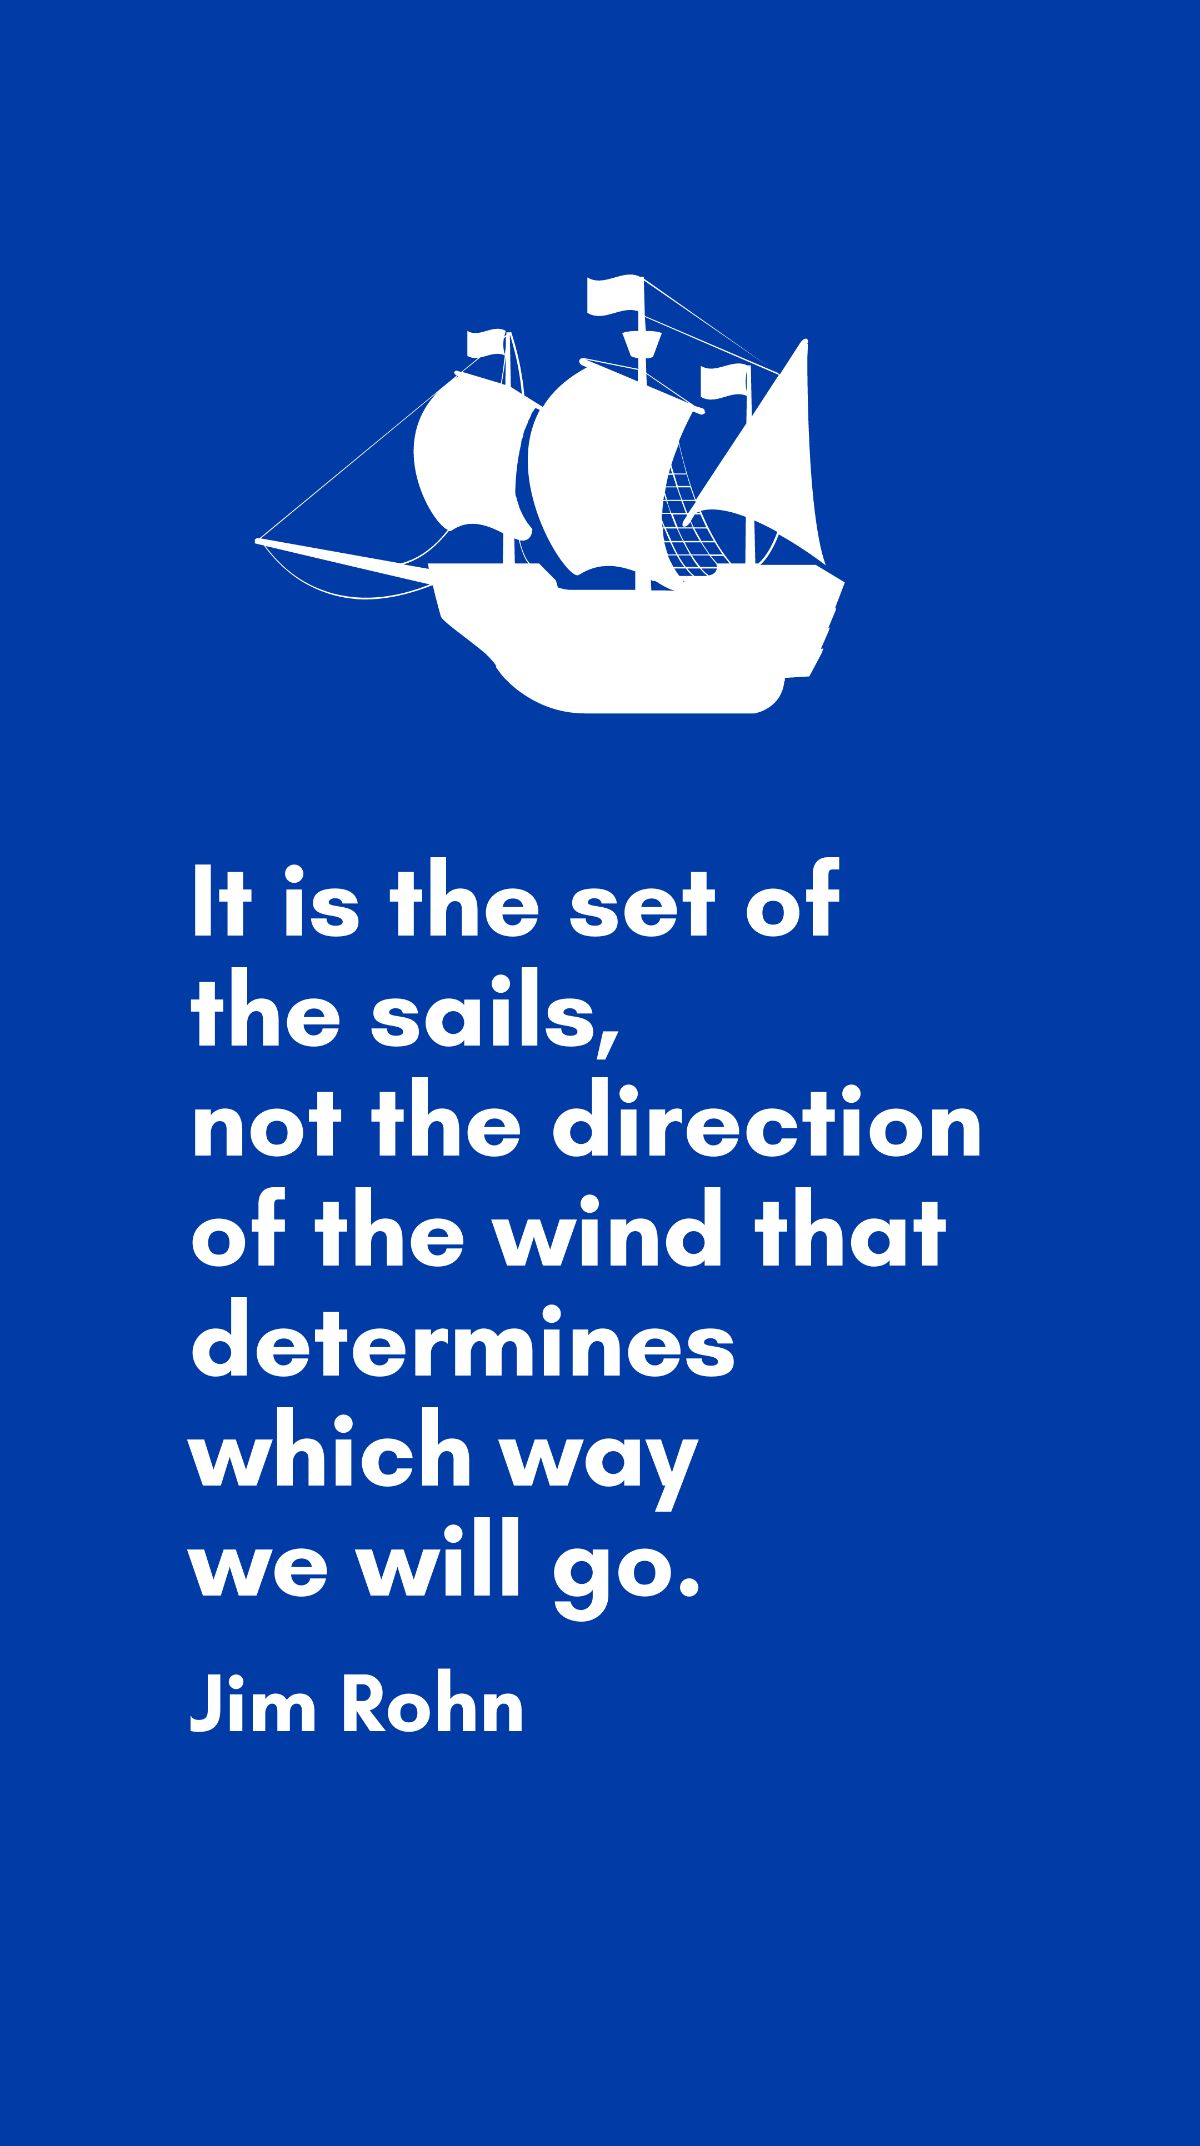 Jim Rohn - It is the set of the sails, not the direction of the wind that determines which way we will go. Template